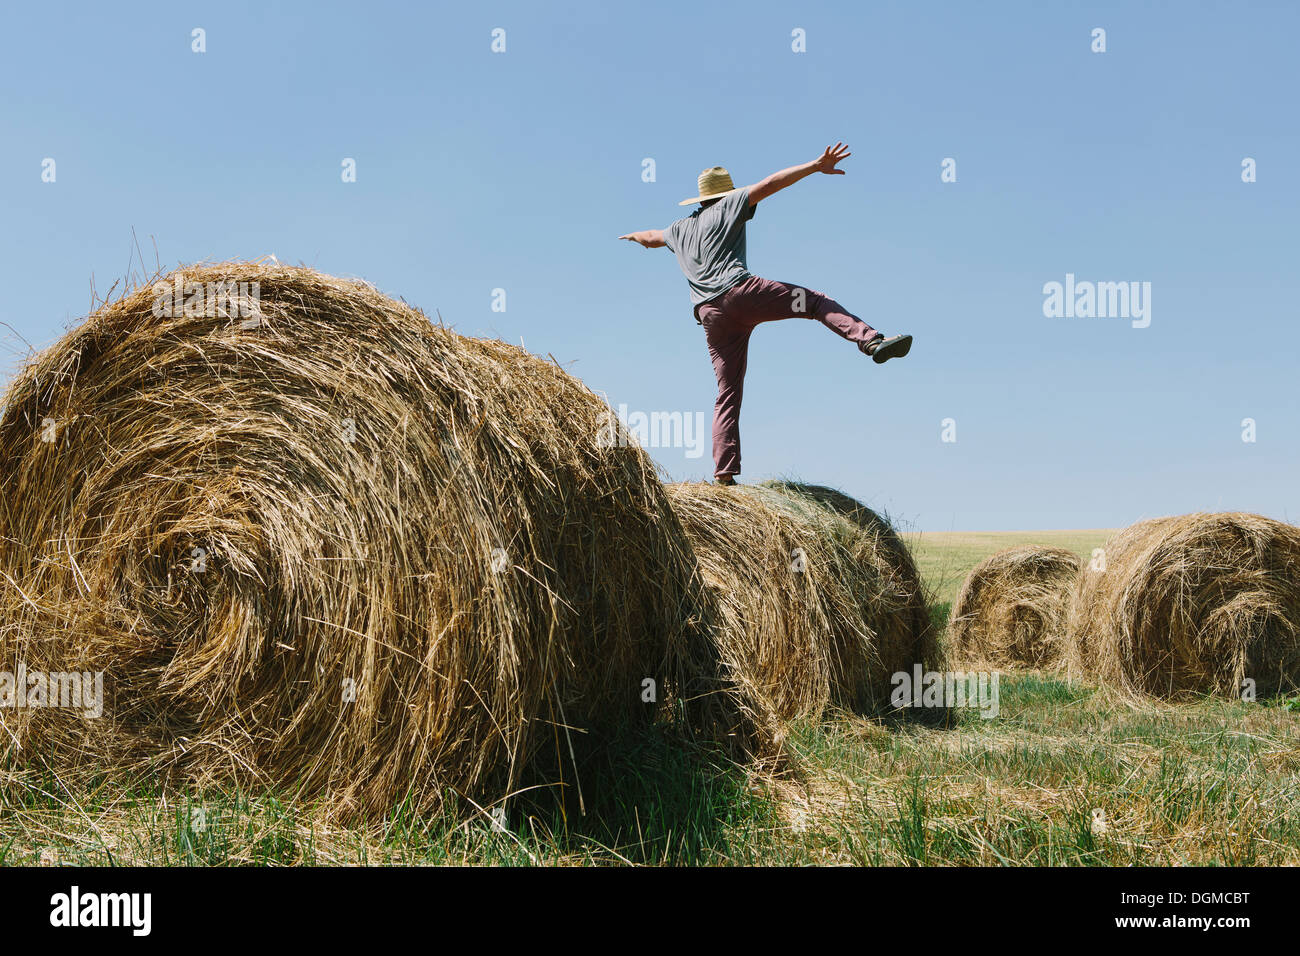 Back view of a man balancing on one leg on top of a hay bale. Stock Photo